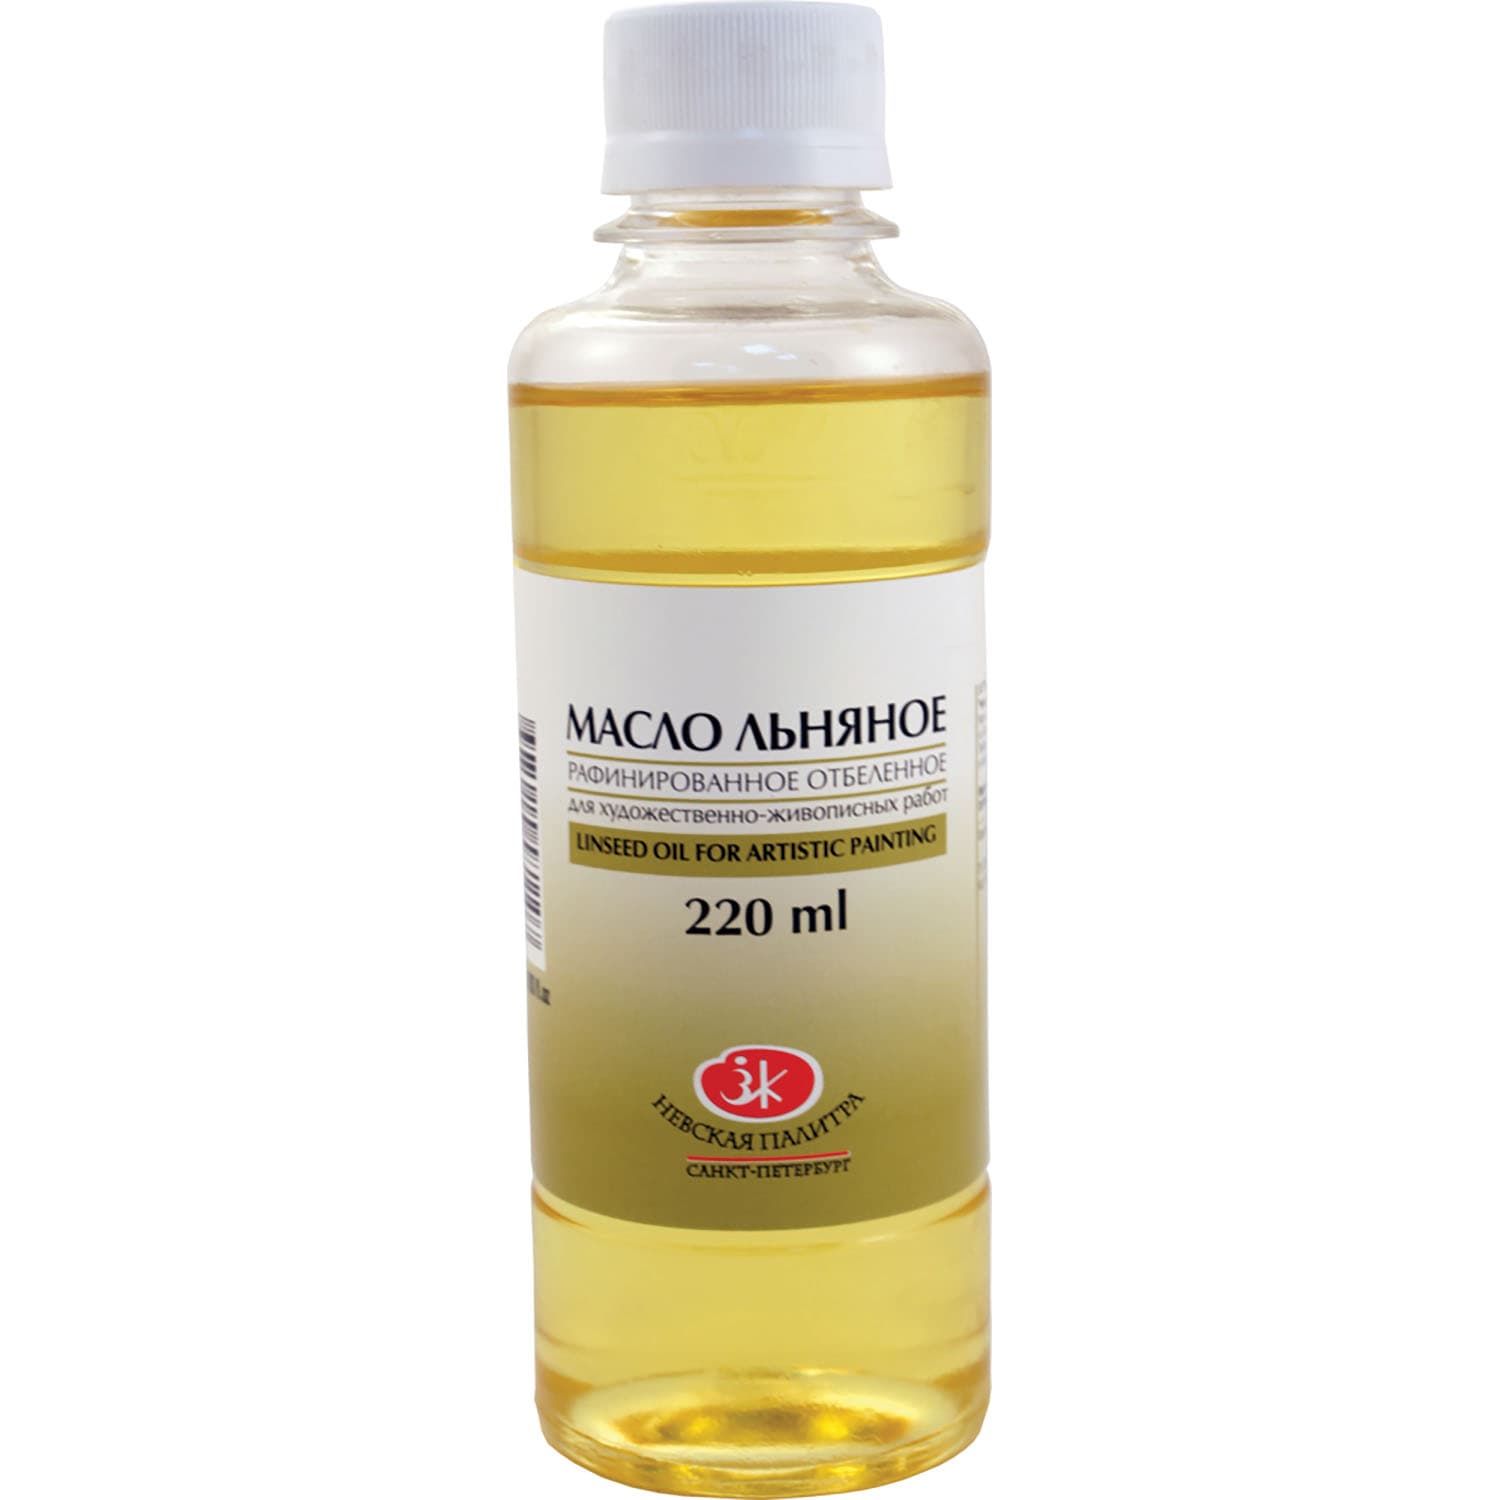 Refined linseed oil for painting, 220 ml